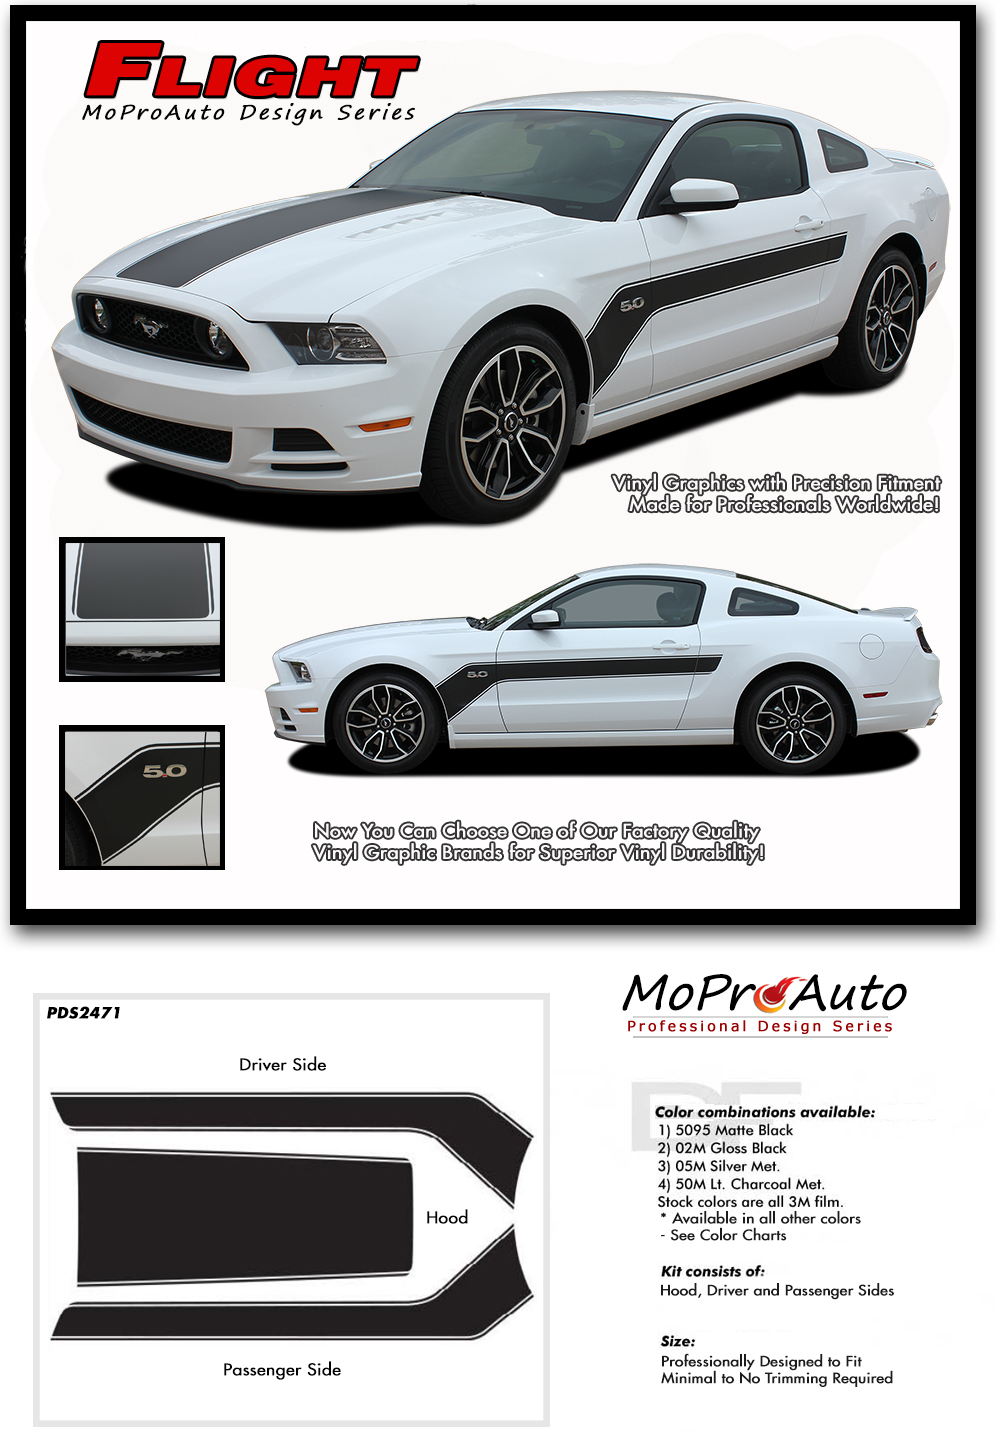 FLIGHT Ford Mustang - MoProAuto Pro Design Series Vinyl Graphics, Stripes and Decals Kit